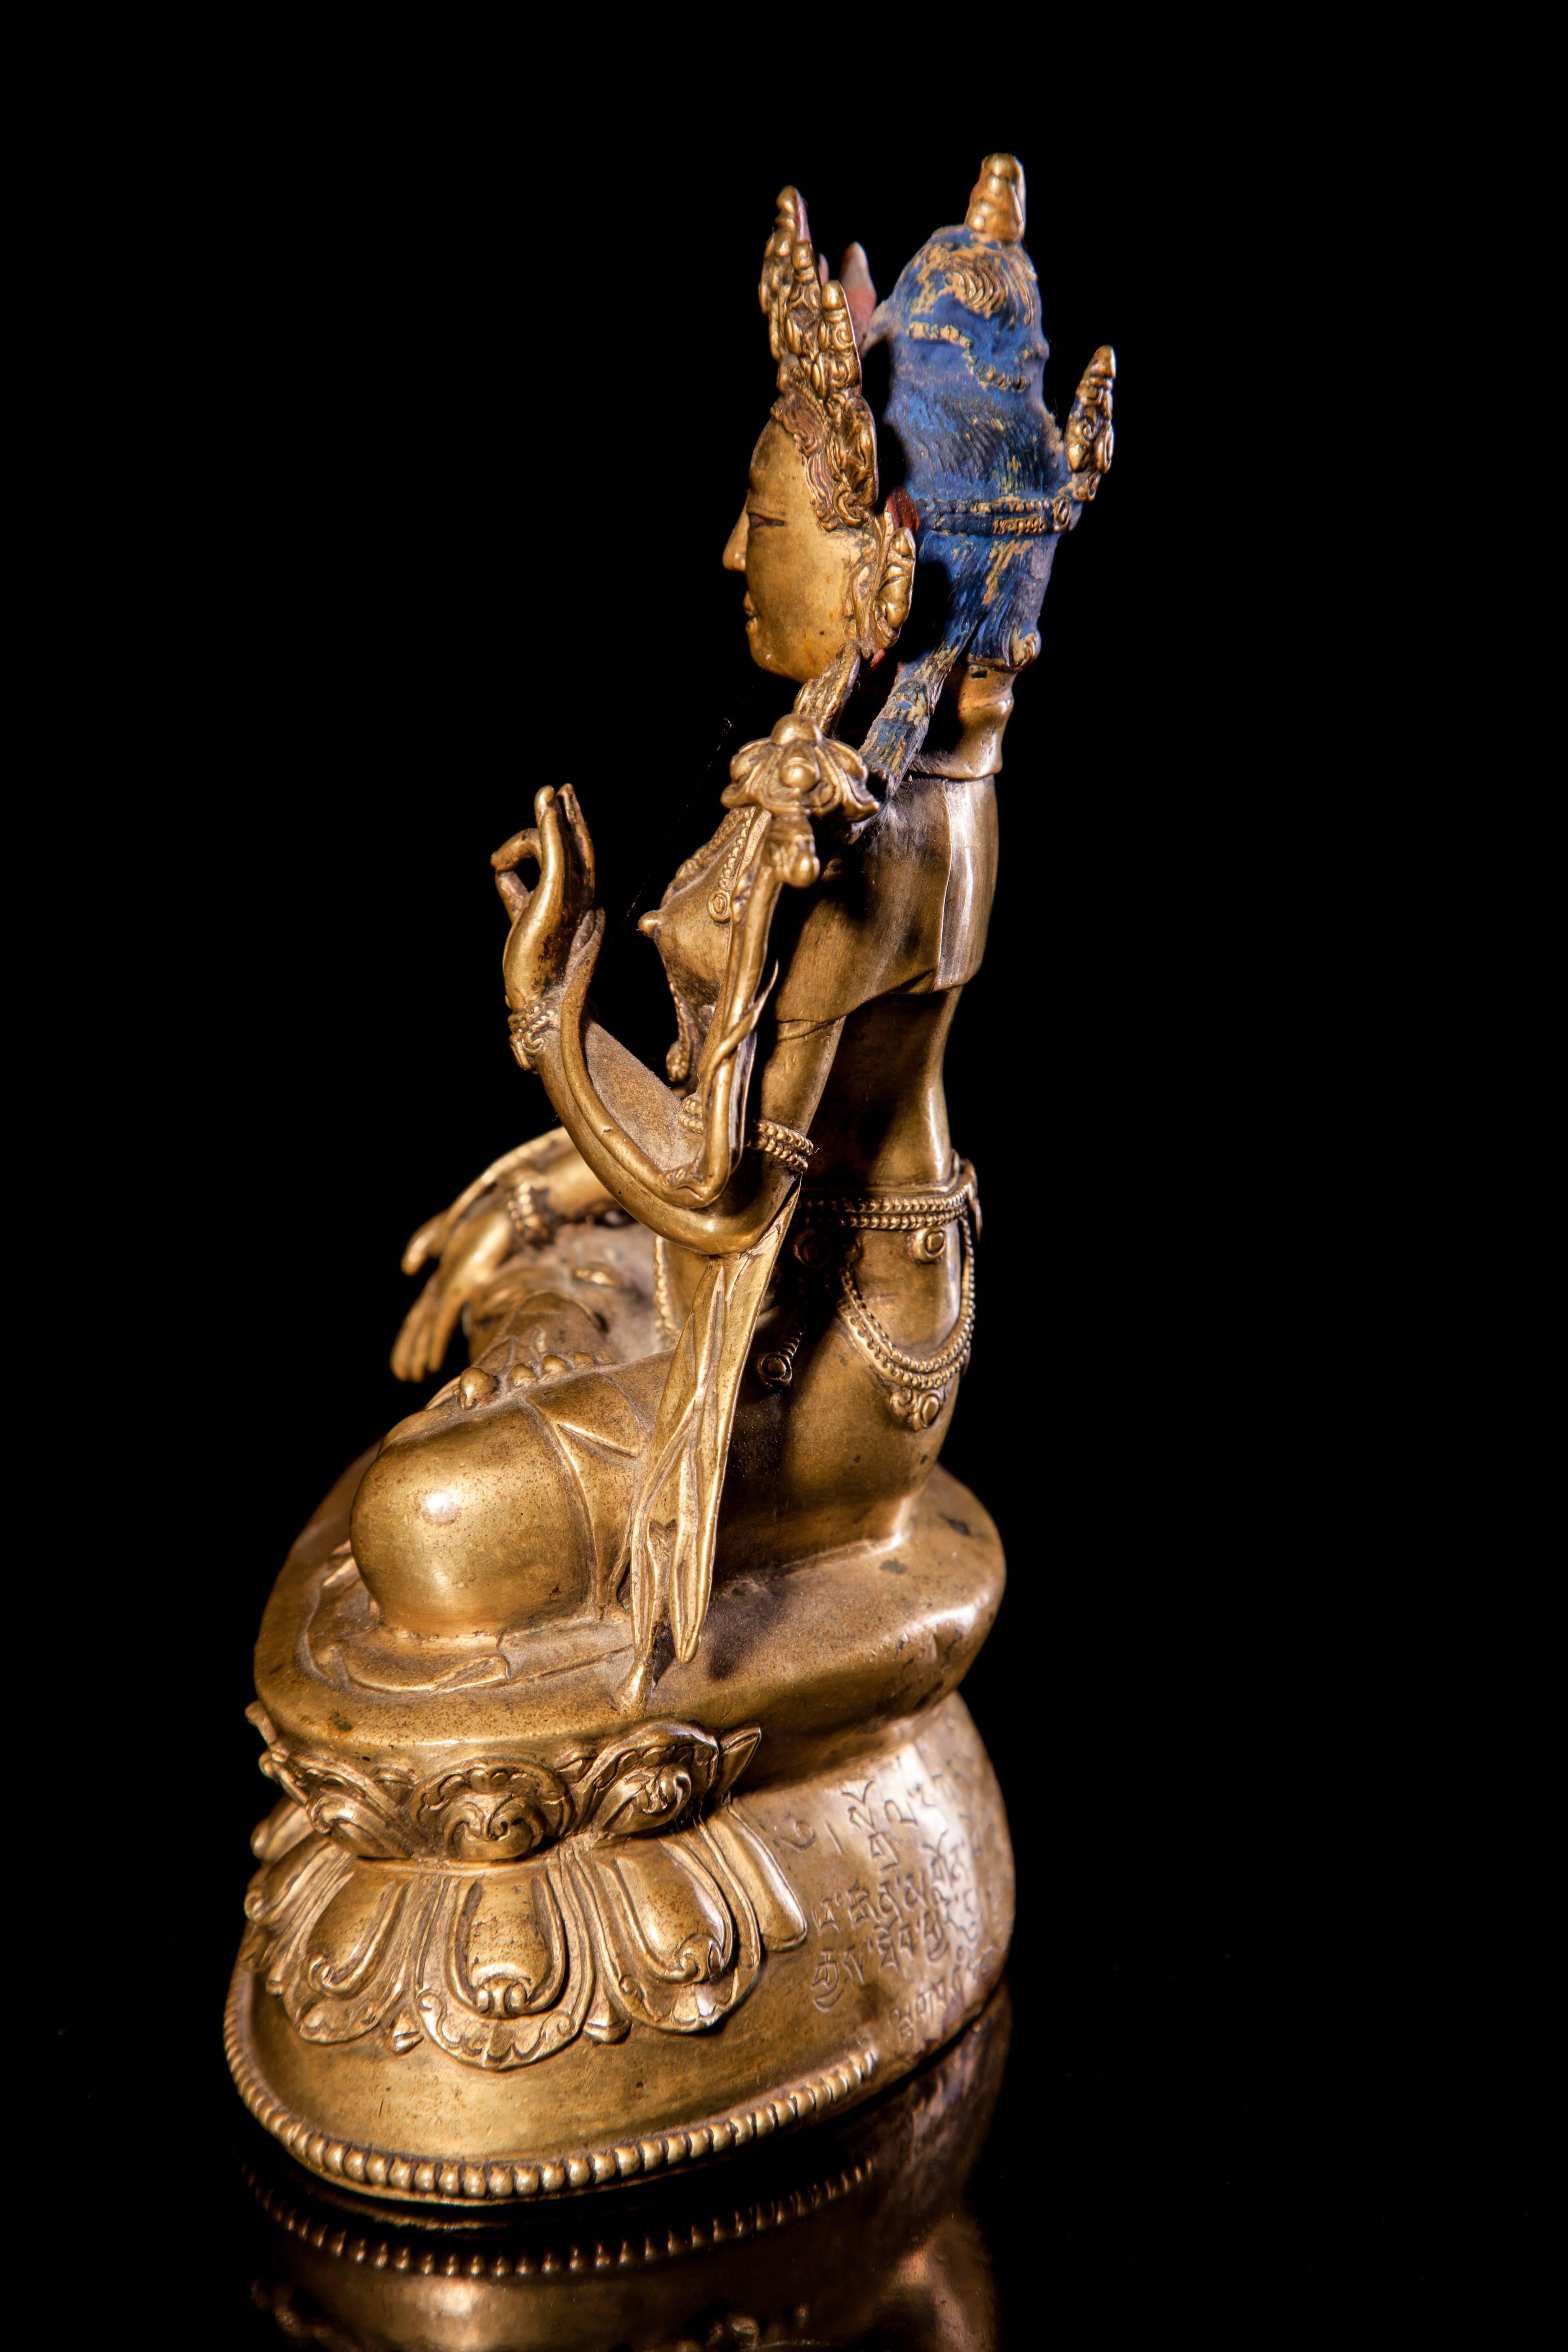 A bronze figure of White Tara,
Tibet, 15th century
Seated in dhyanasana on a double-lotus base, her left hand raised in vitarka mudra and her right lowered in varada mudra, each holding the stem of a lotus, wearing a flowing dhoti and beaded